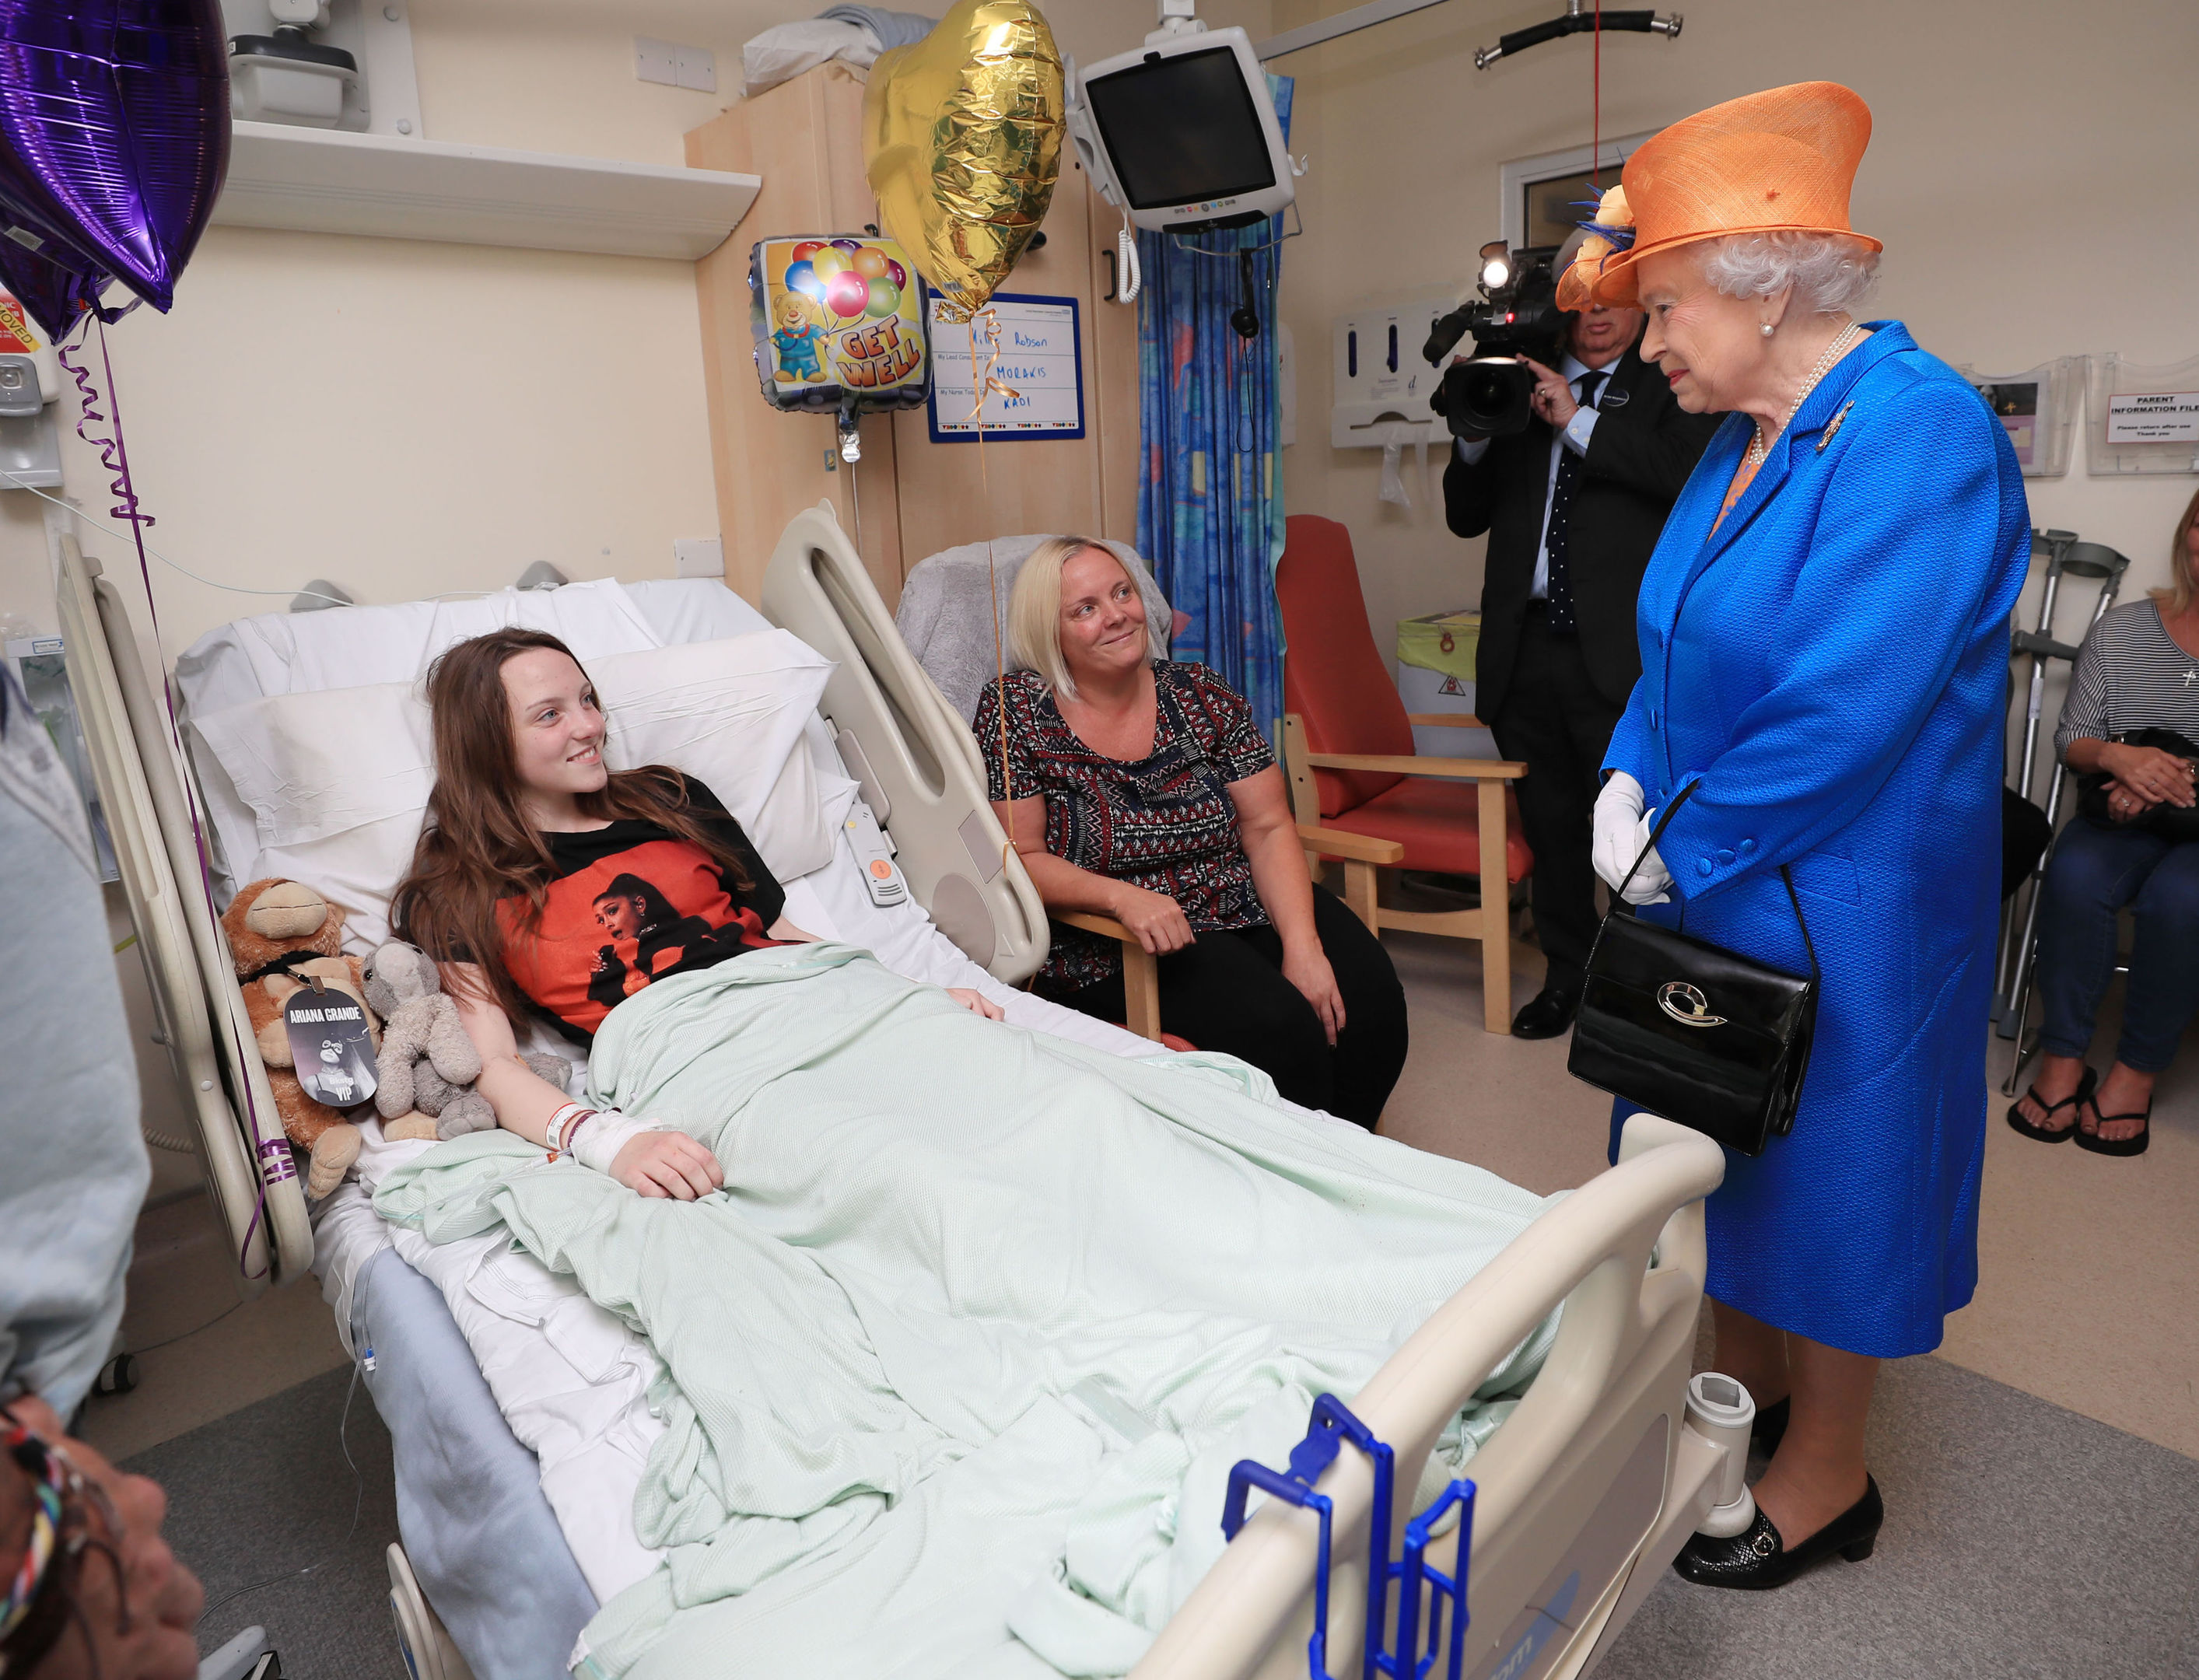 Queen Elizabeth II speaks to Millie Robson, 15, from Co Durham, and her mother, Marie, during a visit to the Royal Manchester Children's Hospital to meet victims of the terror attack in Manchester (Peter Byrne/WPA Pool/Getty Images)